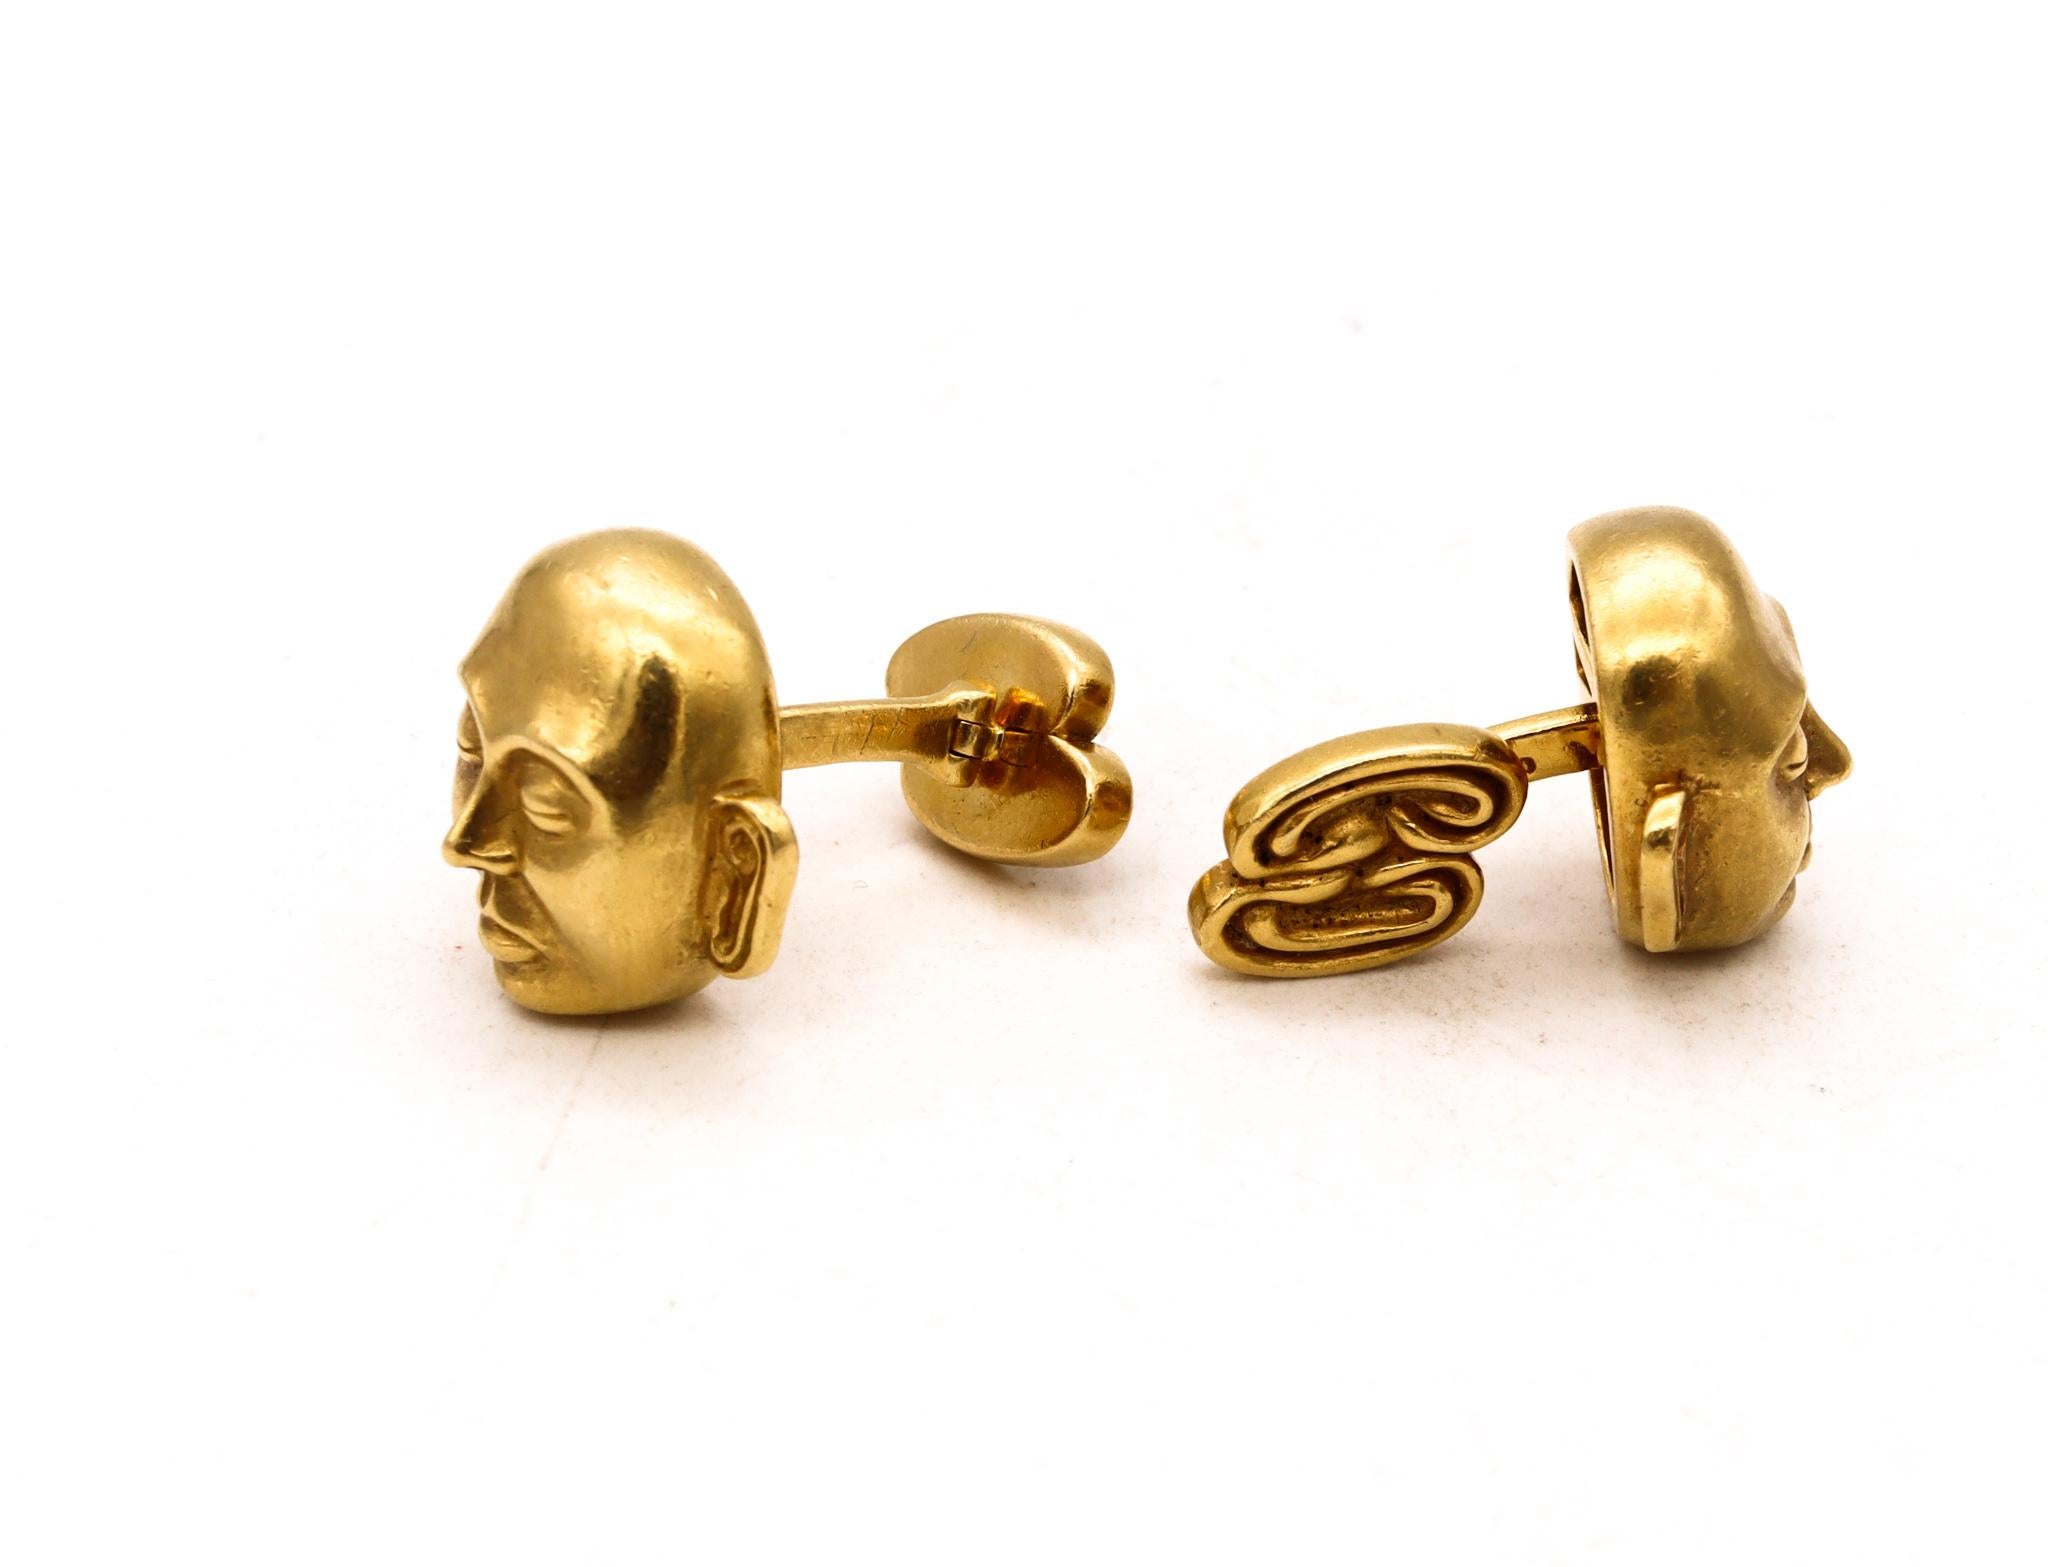 Modern John Landrum Bryant Cufflinks with Buddha Monks Faces in Solid 18Kt Yellow Gold For Sale